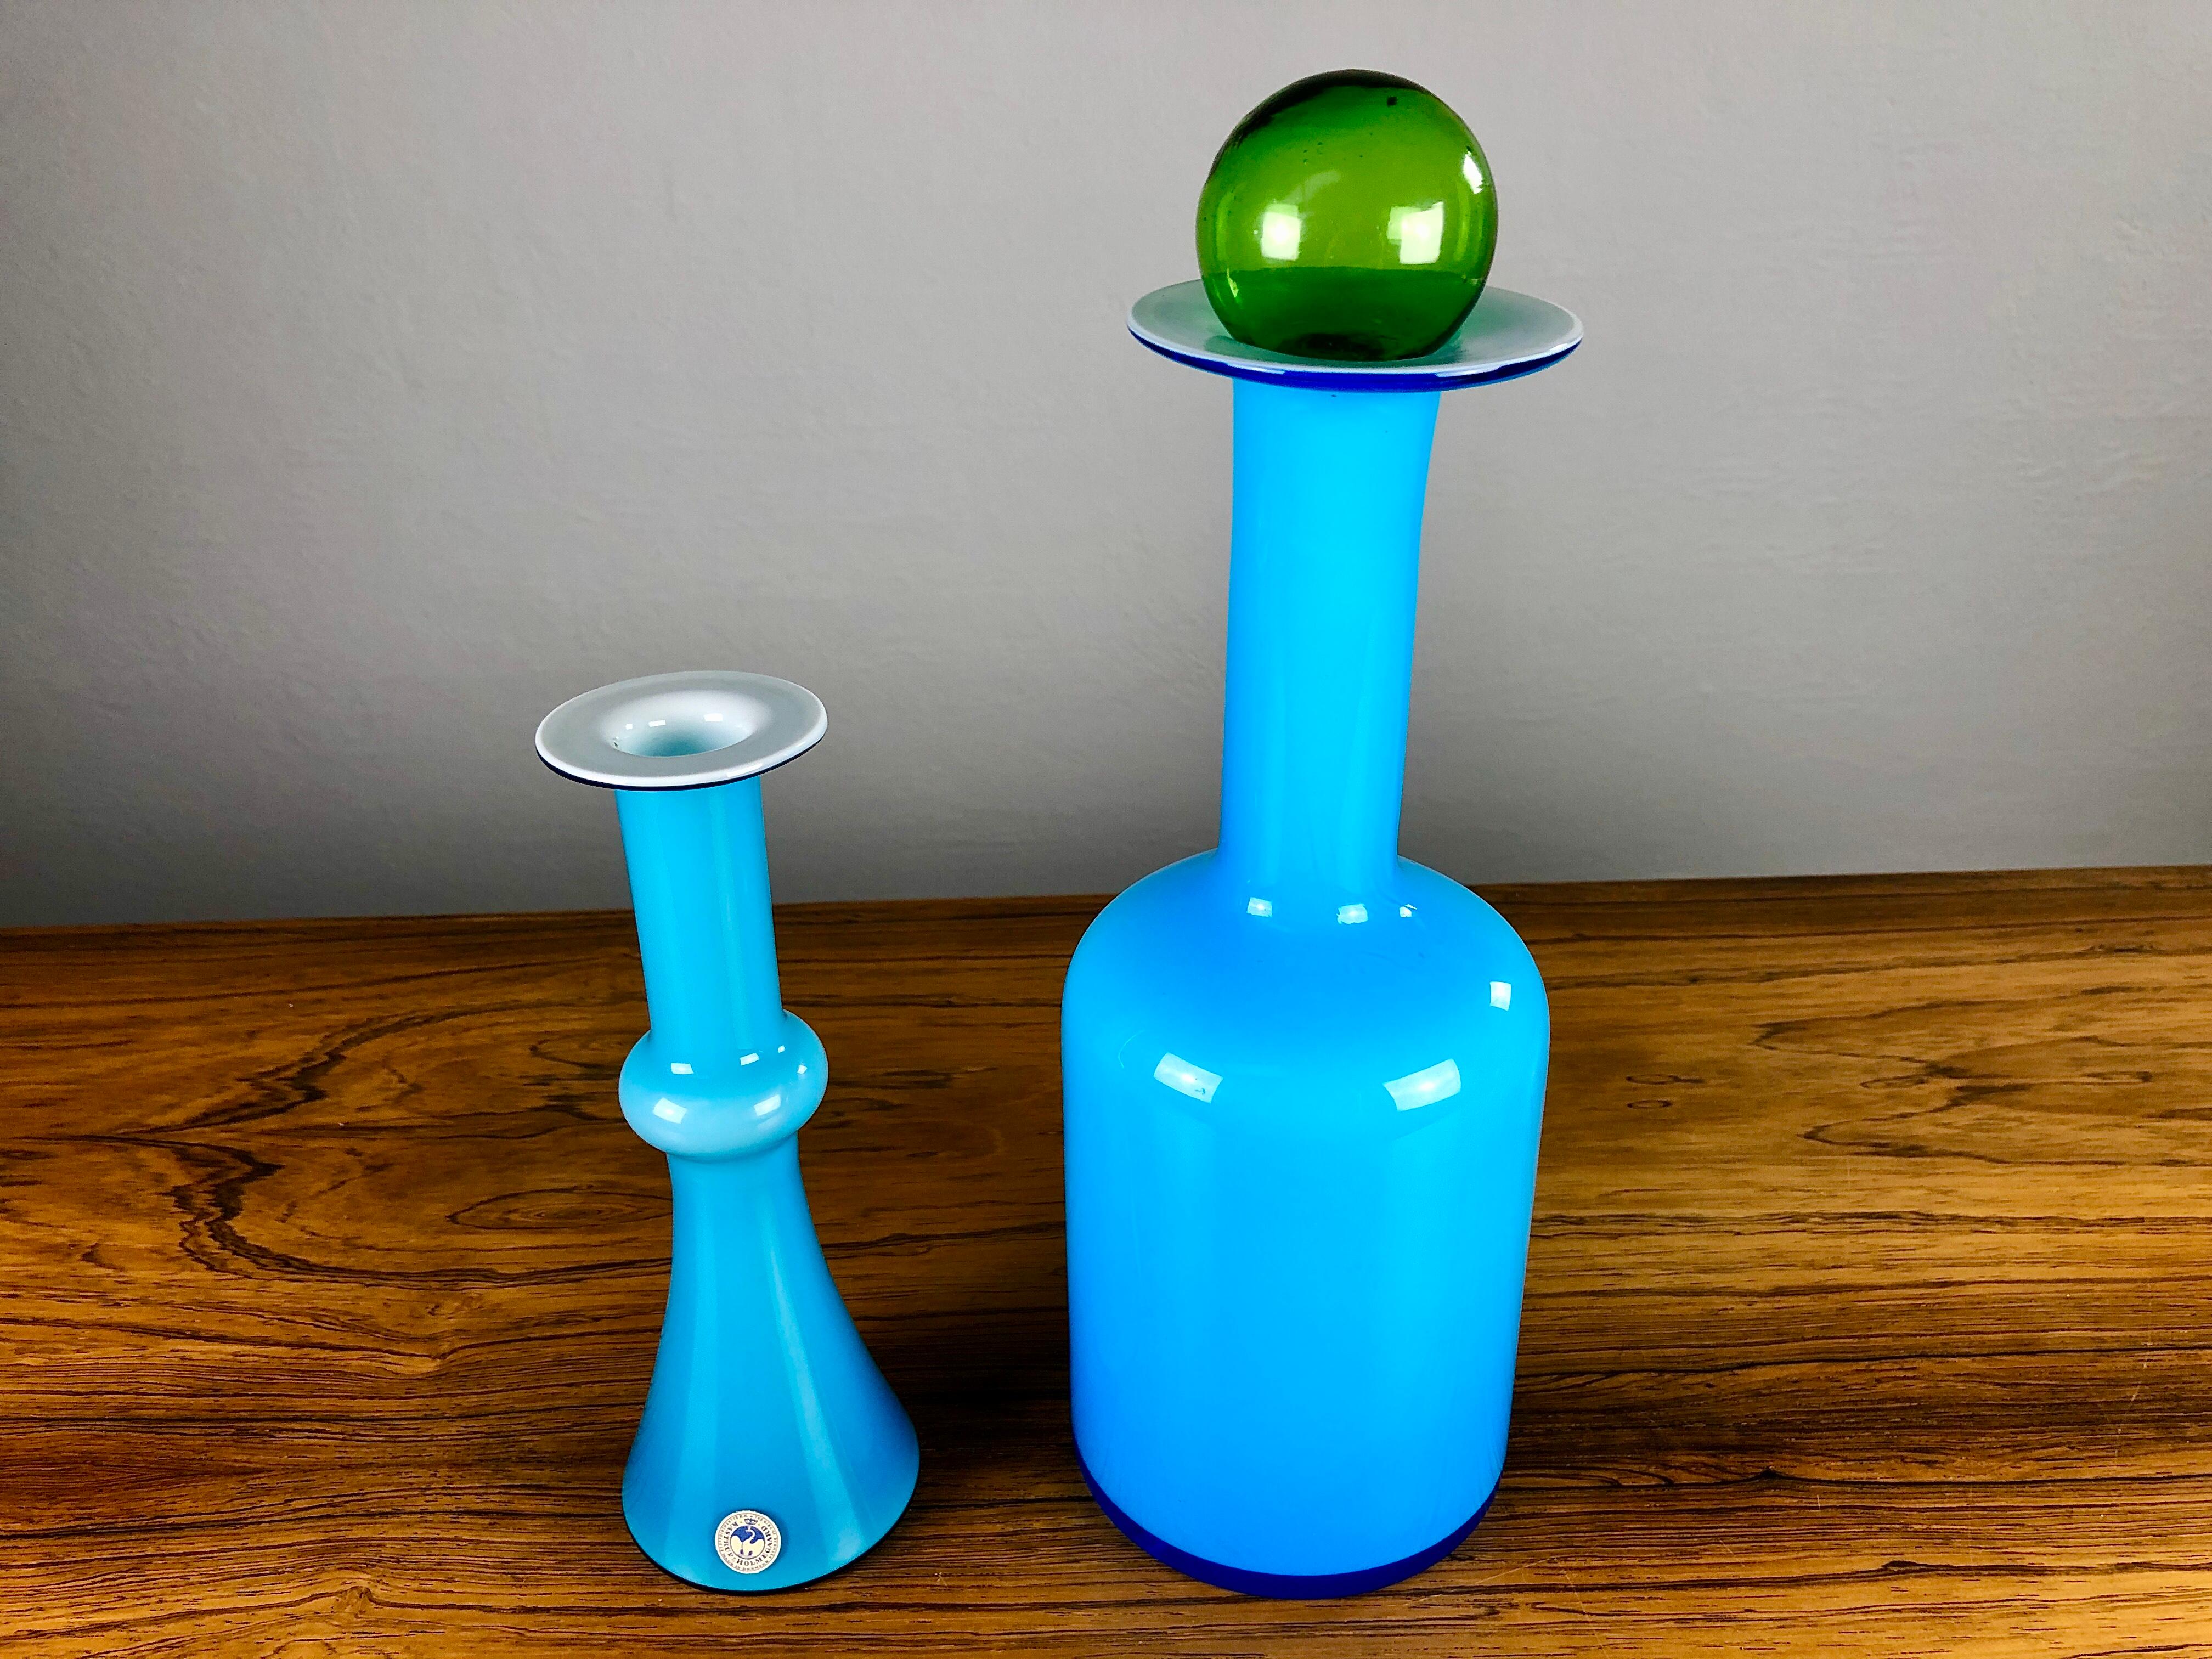 Set of two Danish handblown vases in blue opal glass by Christel, Christer Holmgren and Otto Bauer for Holmegaard.

The vases are made in bright blue hand blown opal 3 layer glass with a white glass base and a green handblown glass plug/ball. The